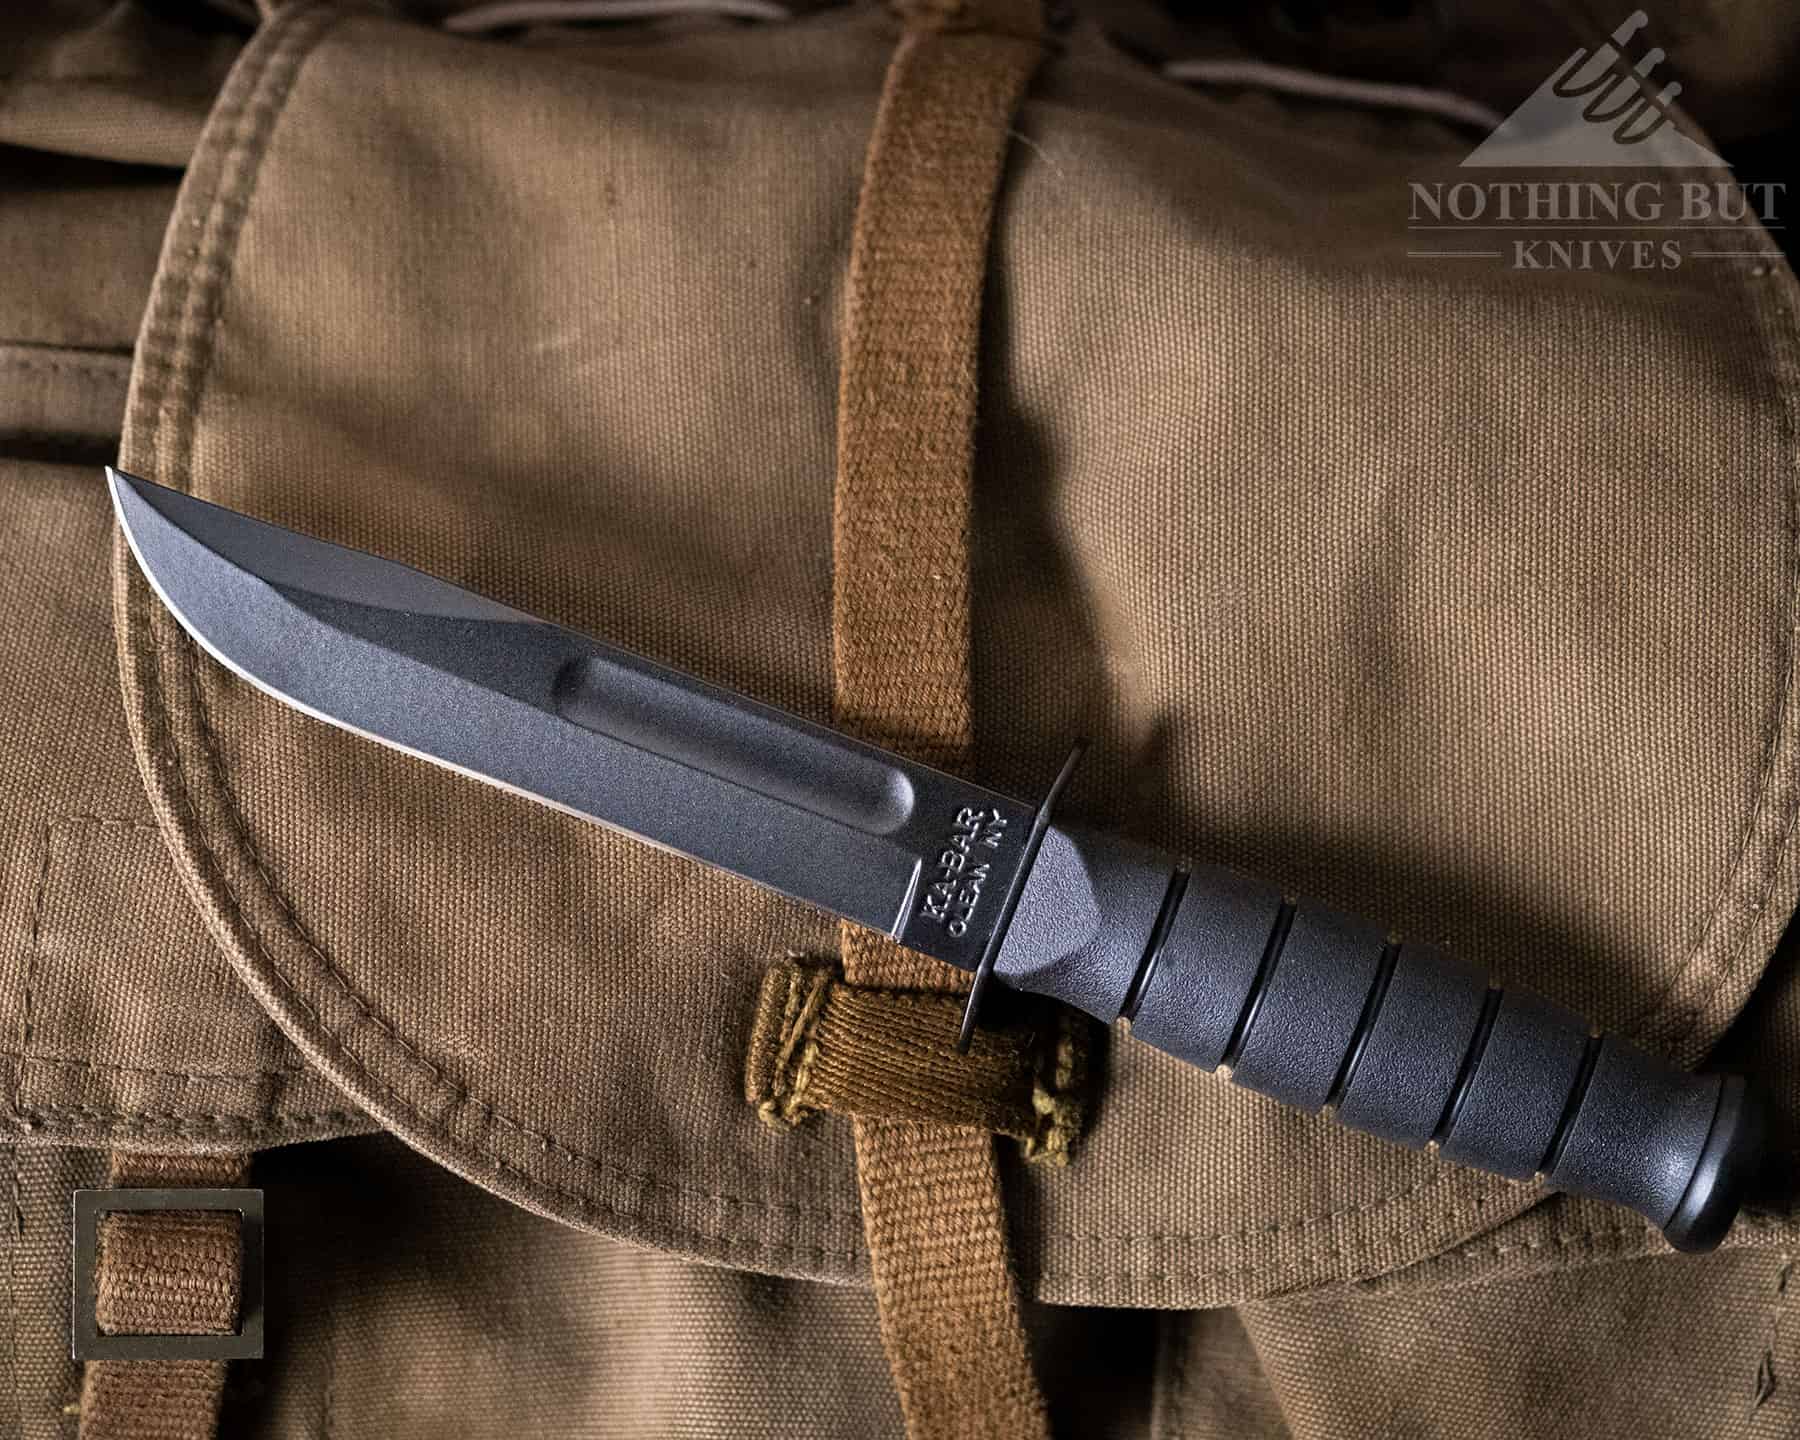 The Short Ka-Kar has the classic tactical Ka-Bar look, but it is a little smaller and the handle is more comfortable than the original.